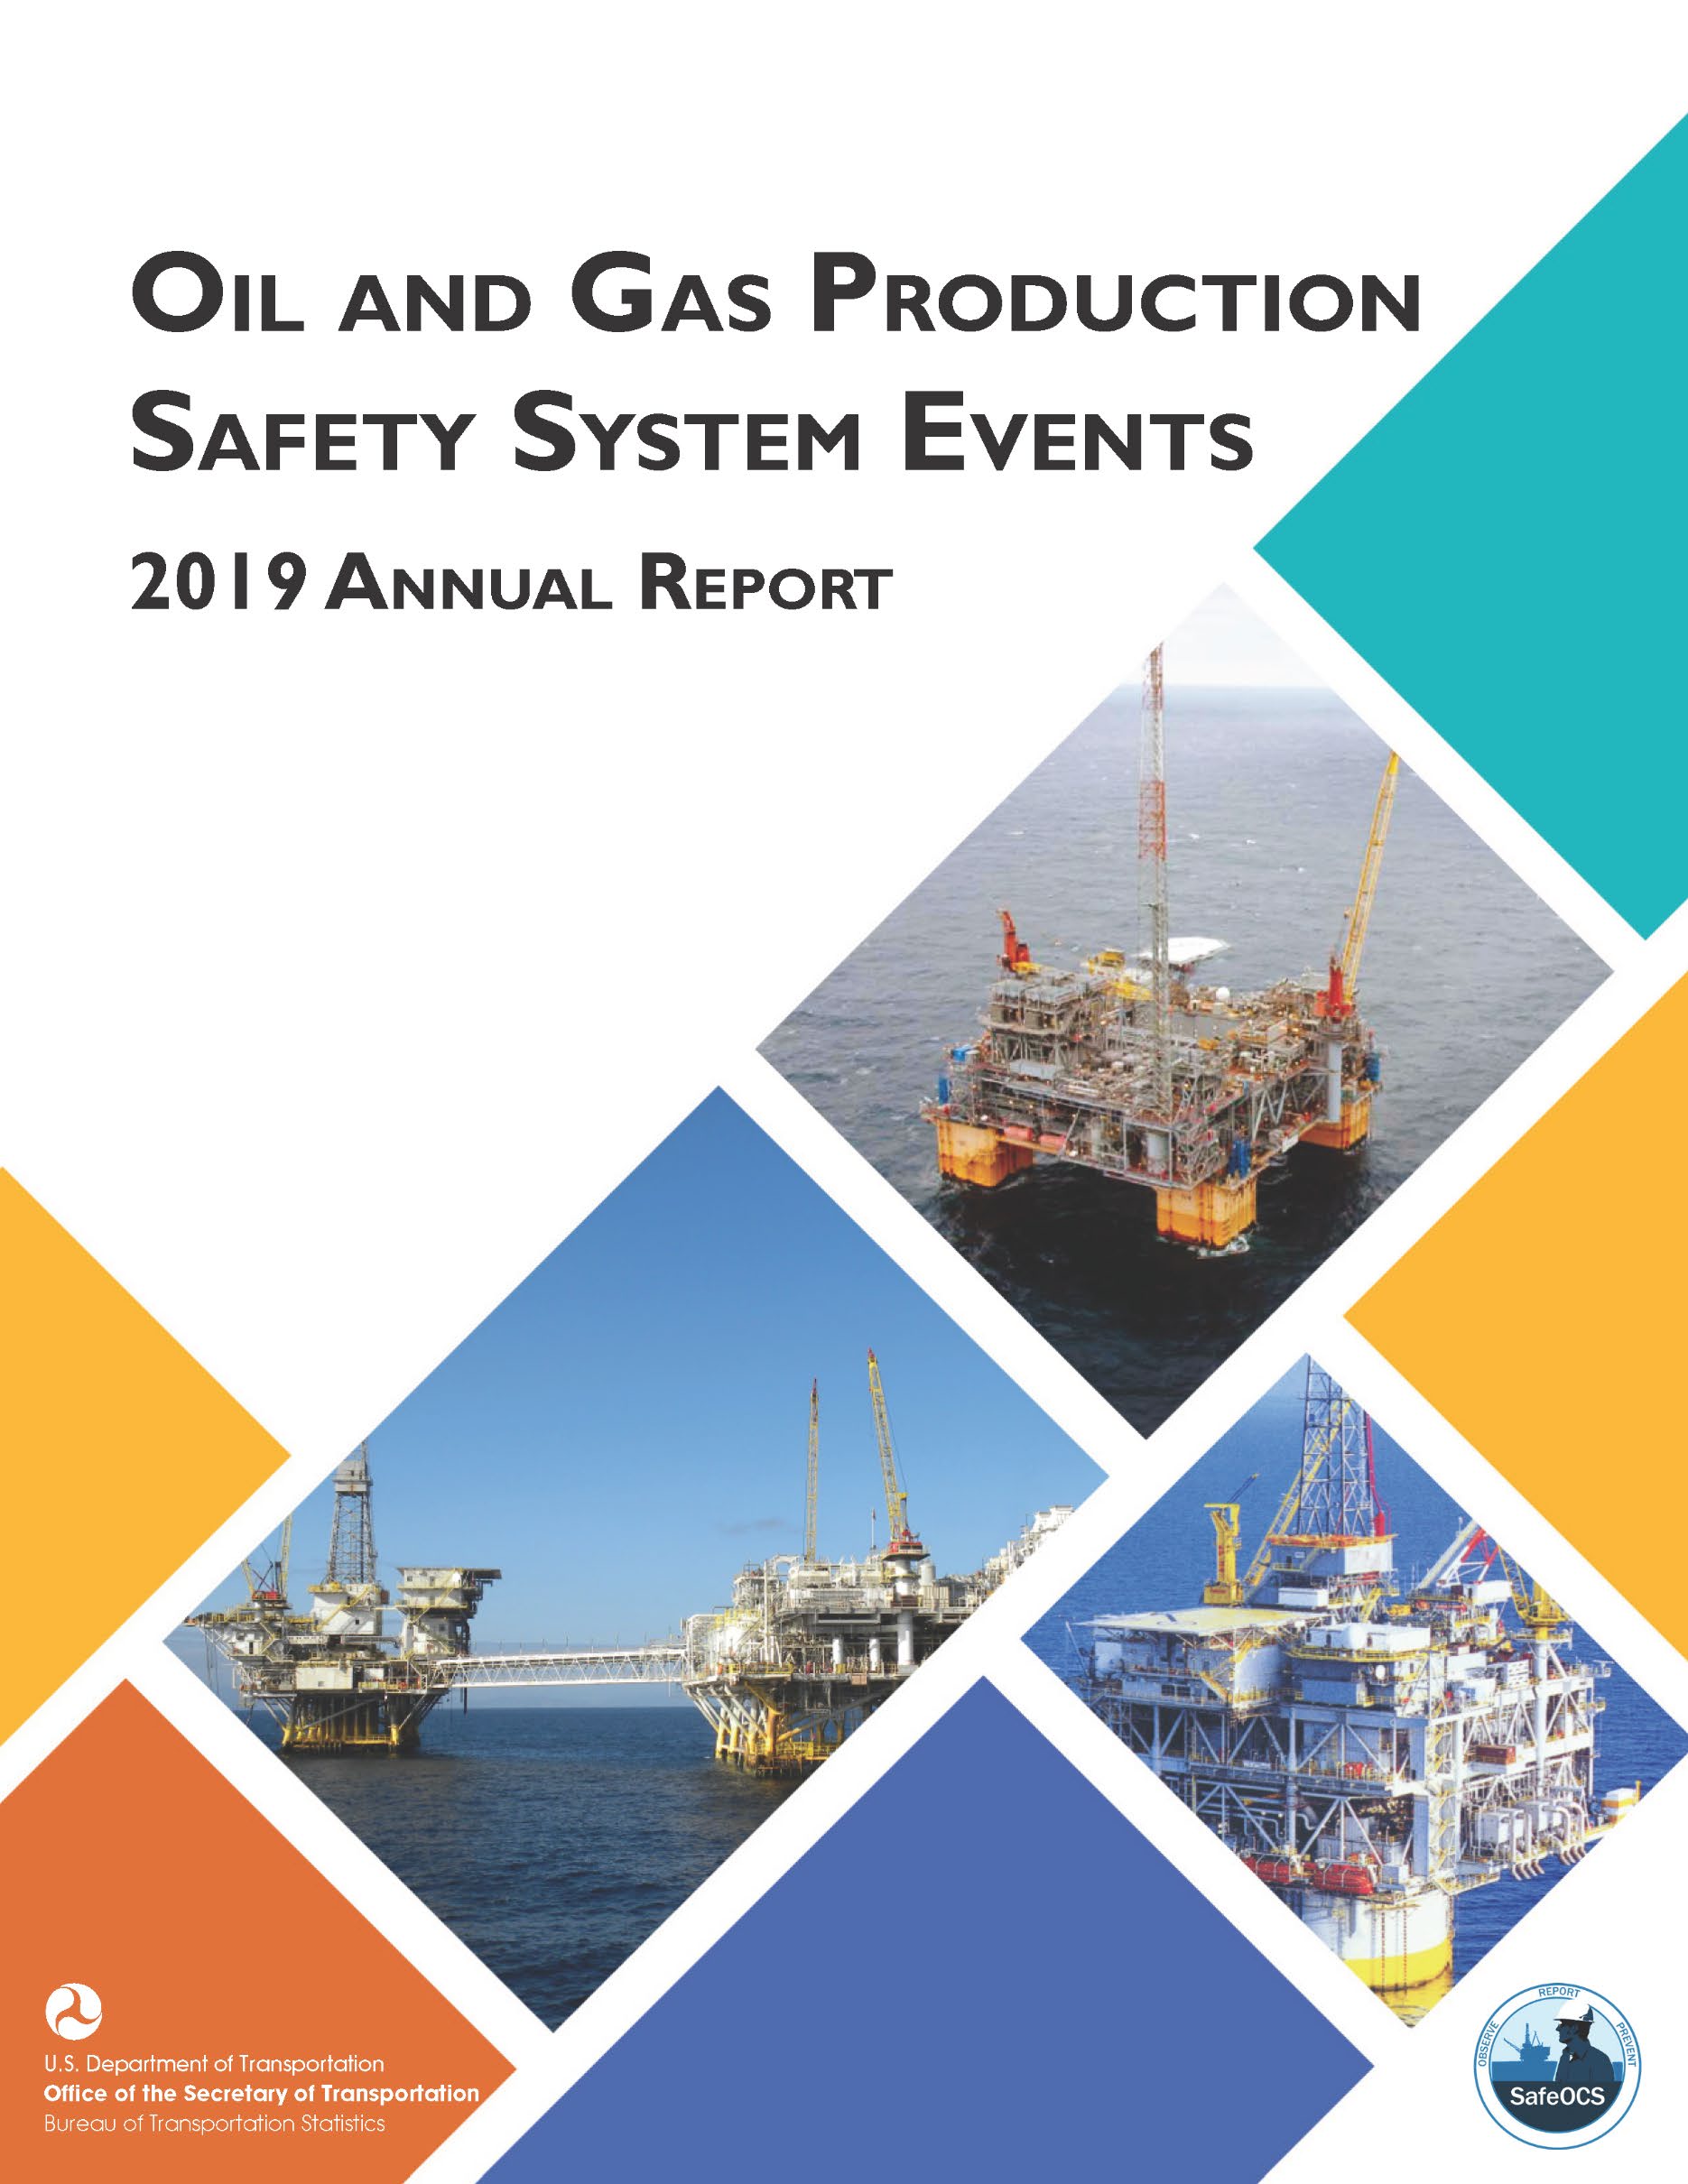 2019 SafeOCS SPPE annual report download link